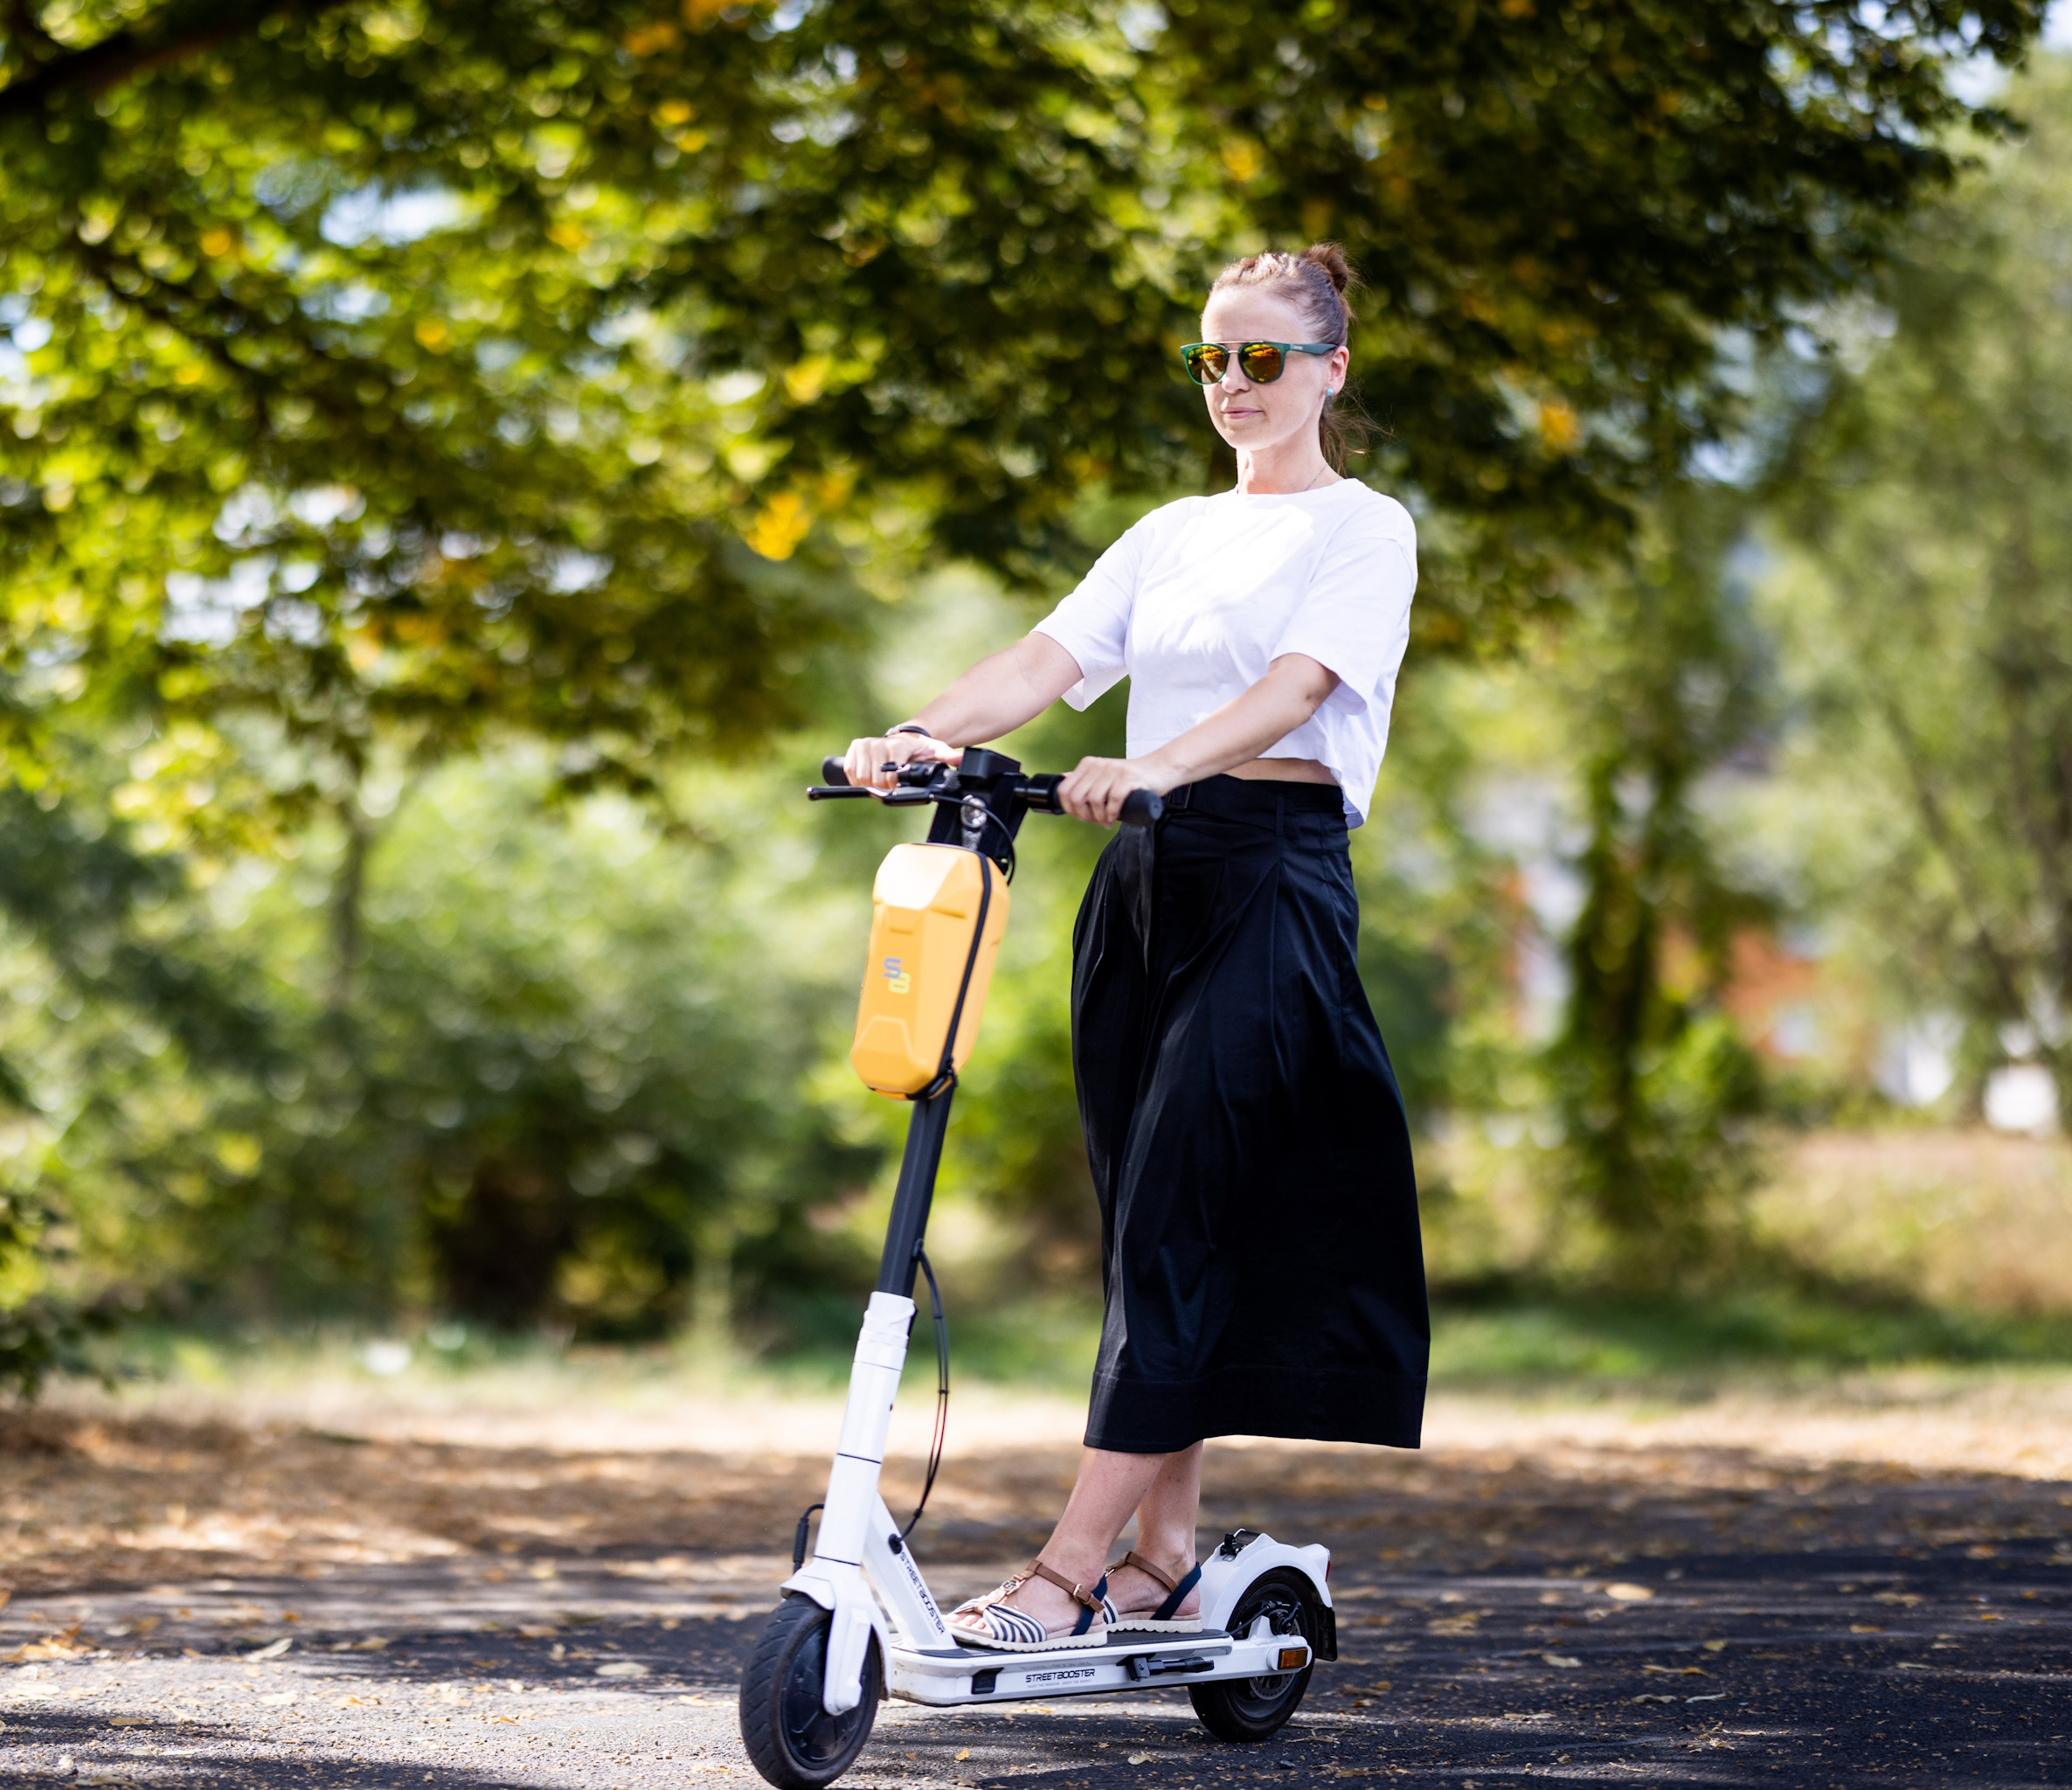 STREETBOOSTER E-Scooter STREETBOOSTER One (8,5 E-Scooter weiß Zoll, Weiß)